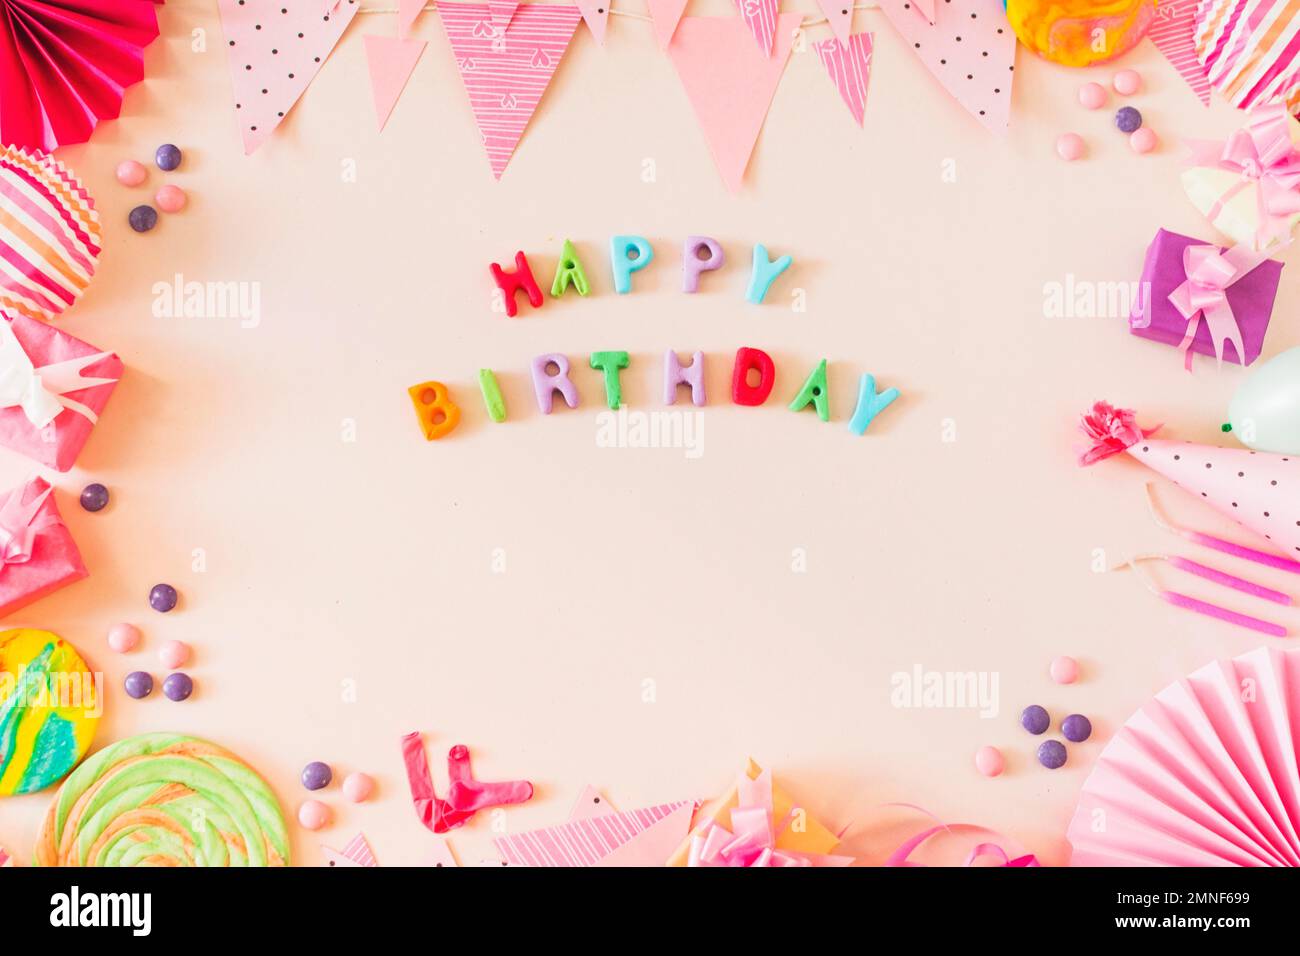 happy birthday text with party concept colored background. High ...